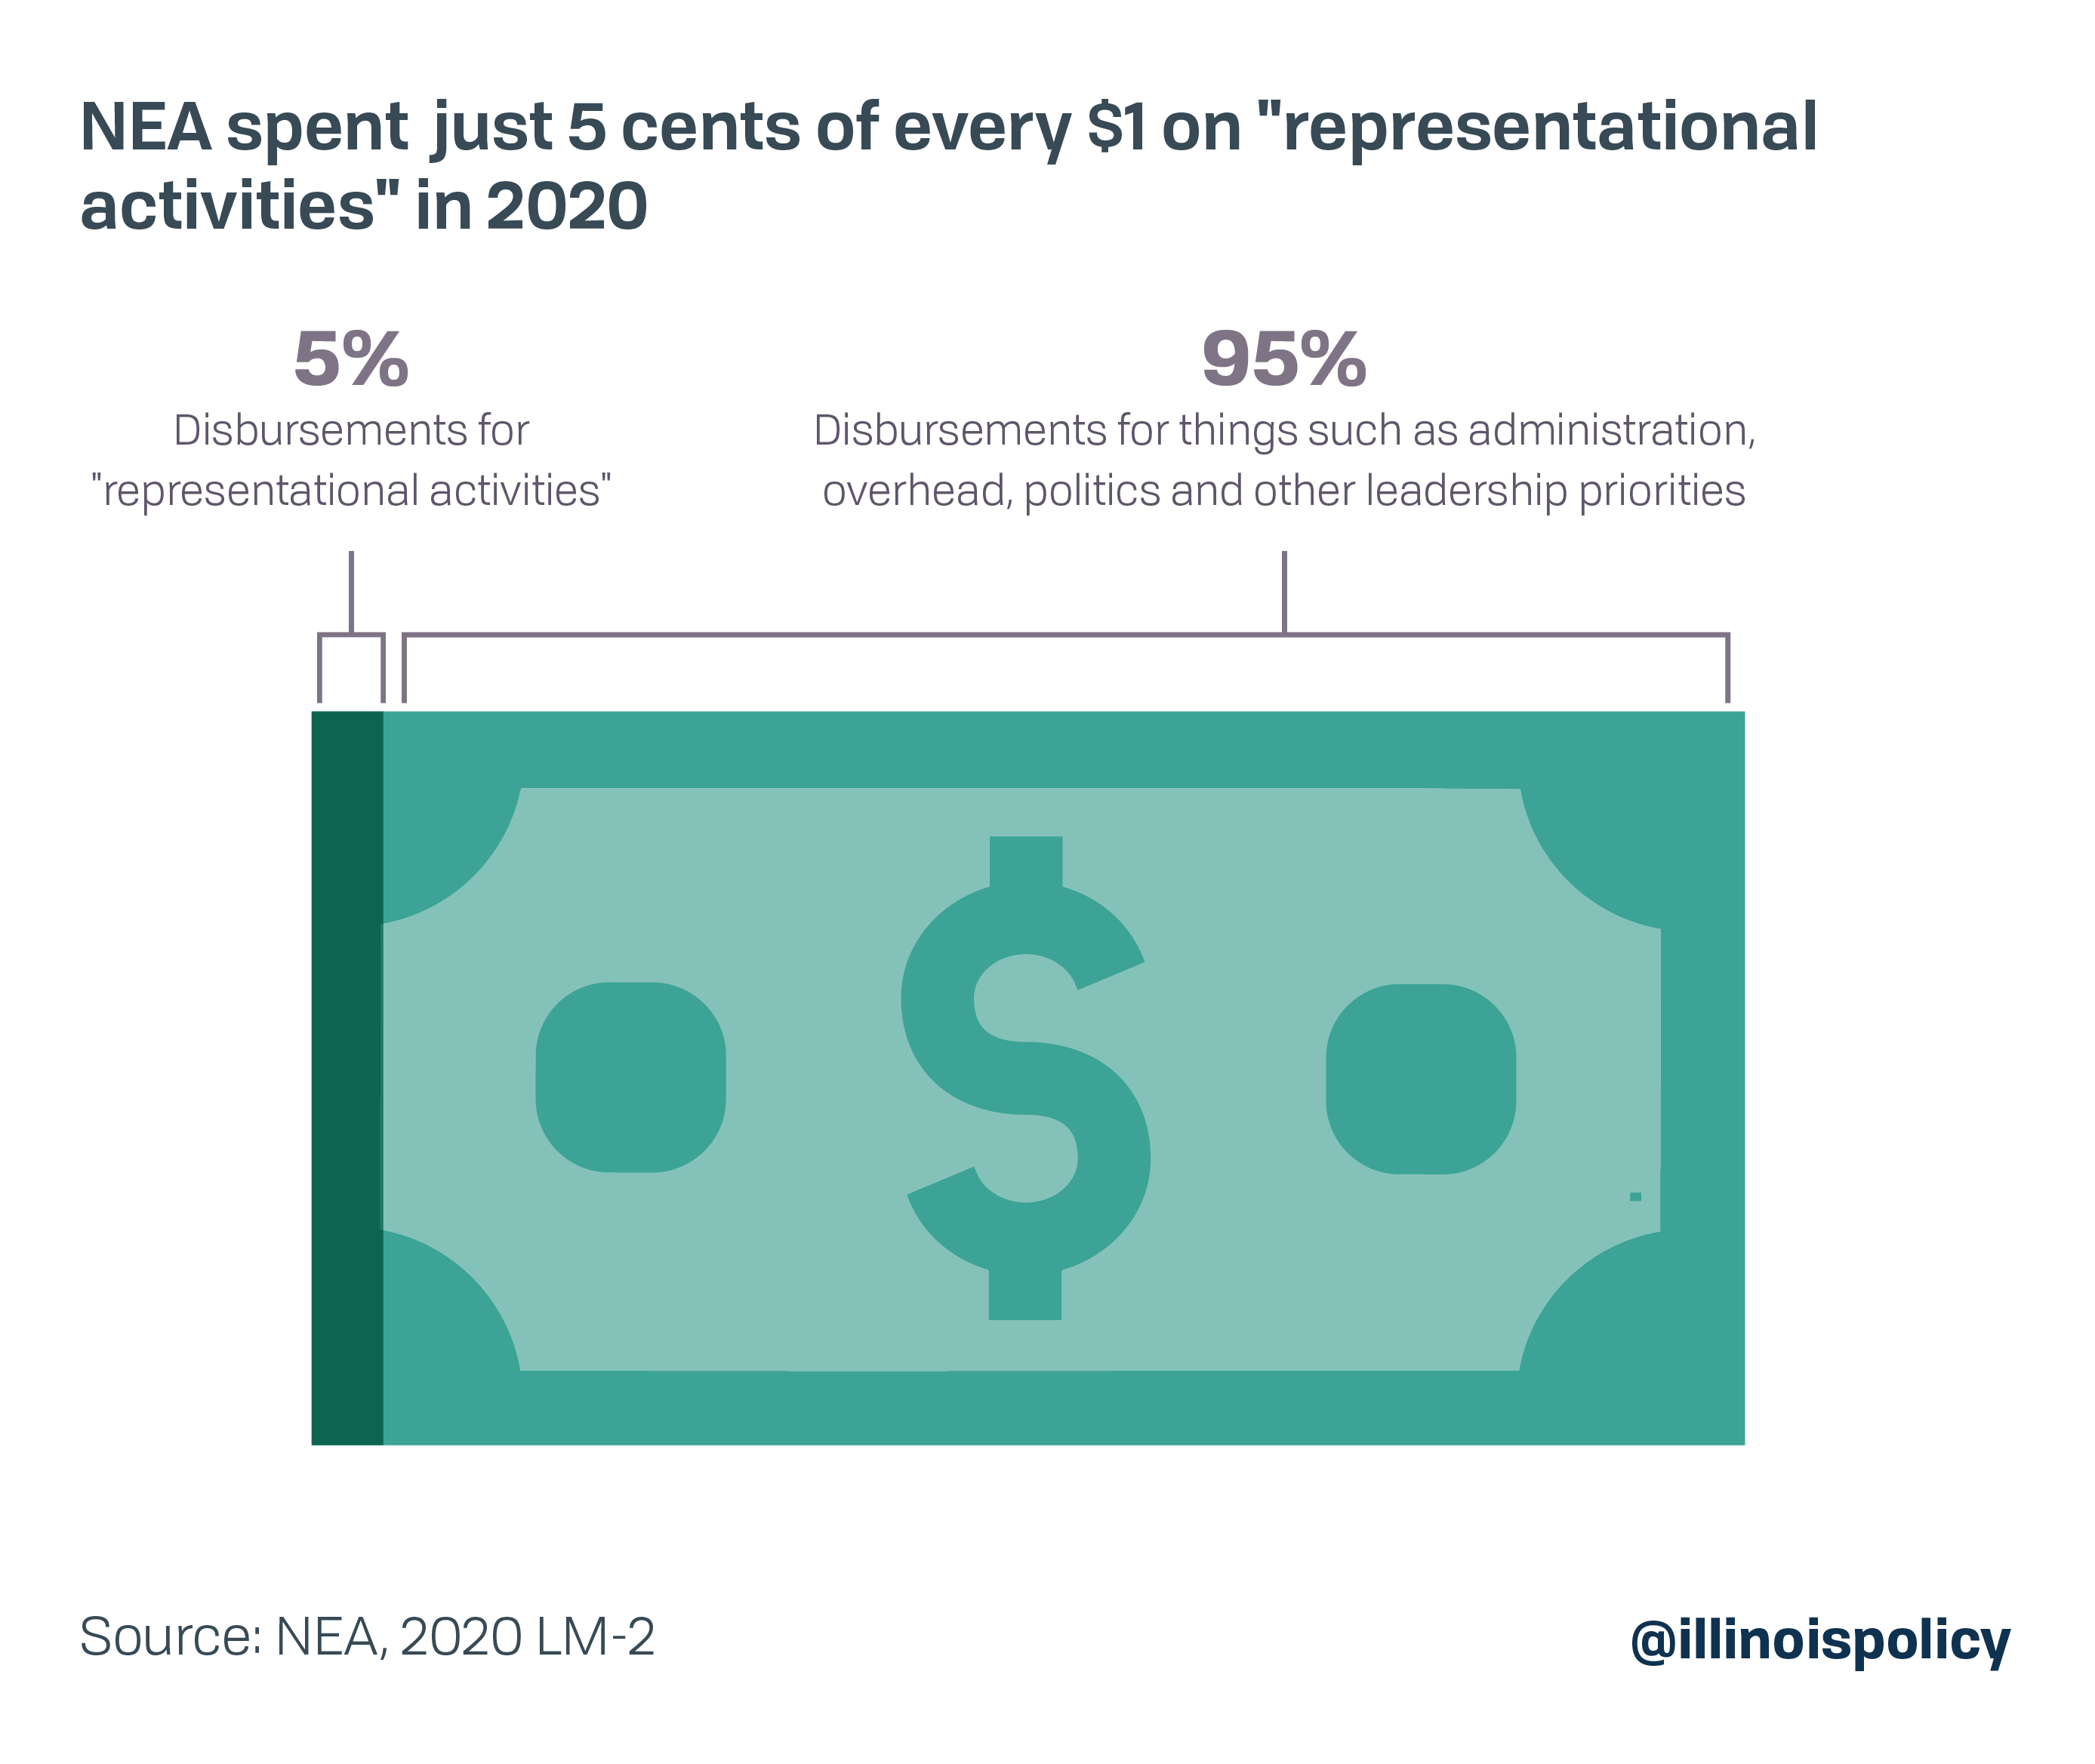 NEA spent just 5 cents of every $1 on "representational activities" in 2020